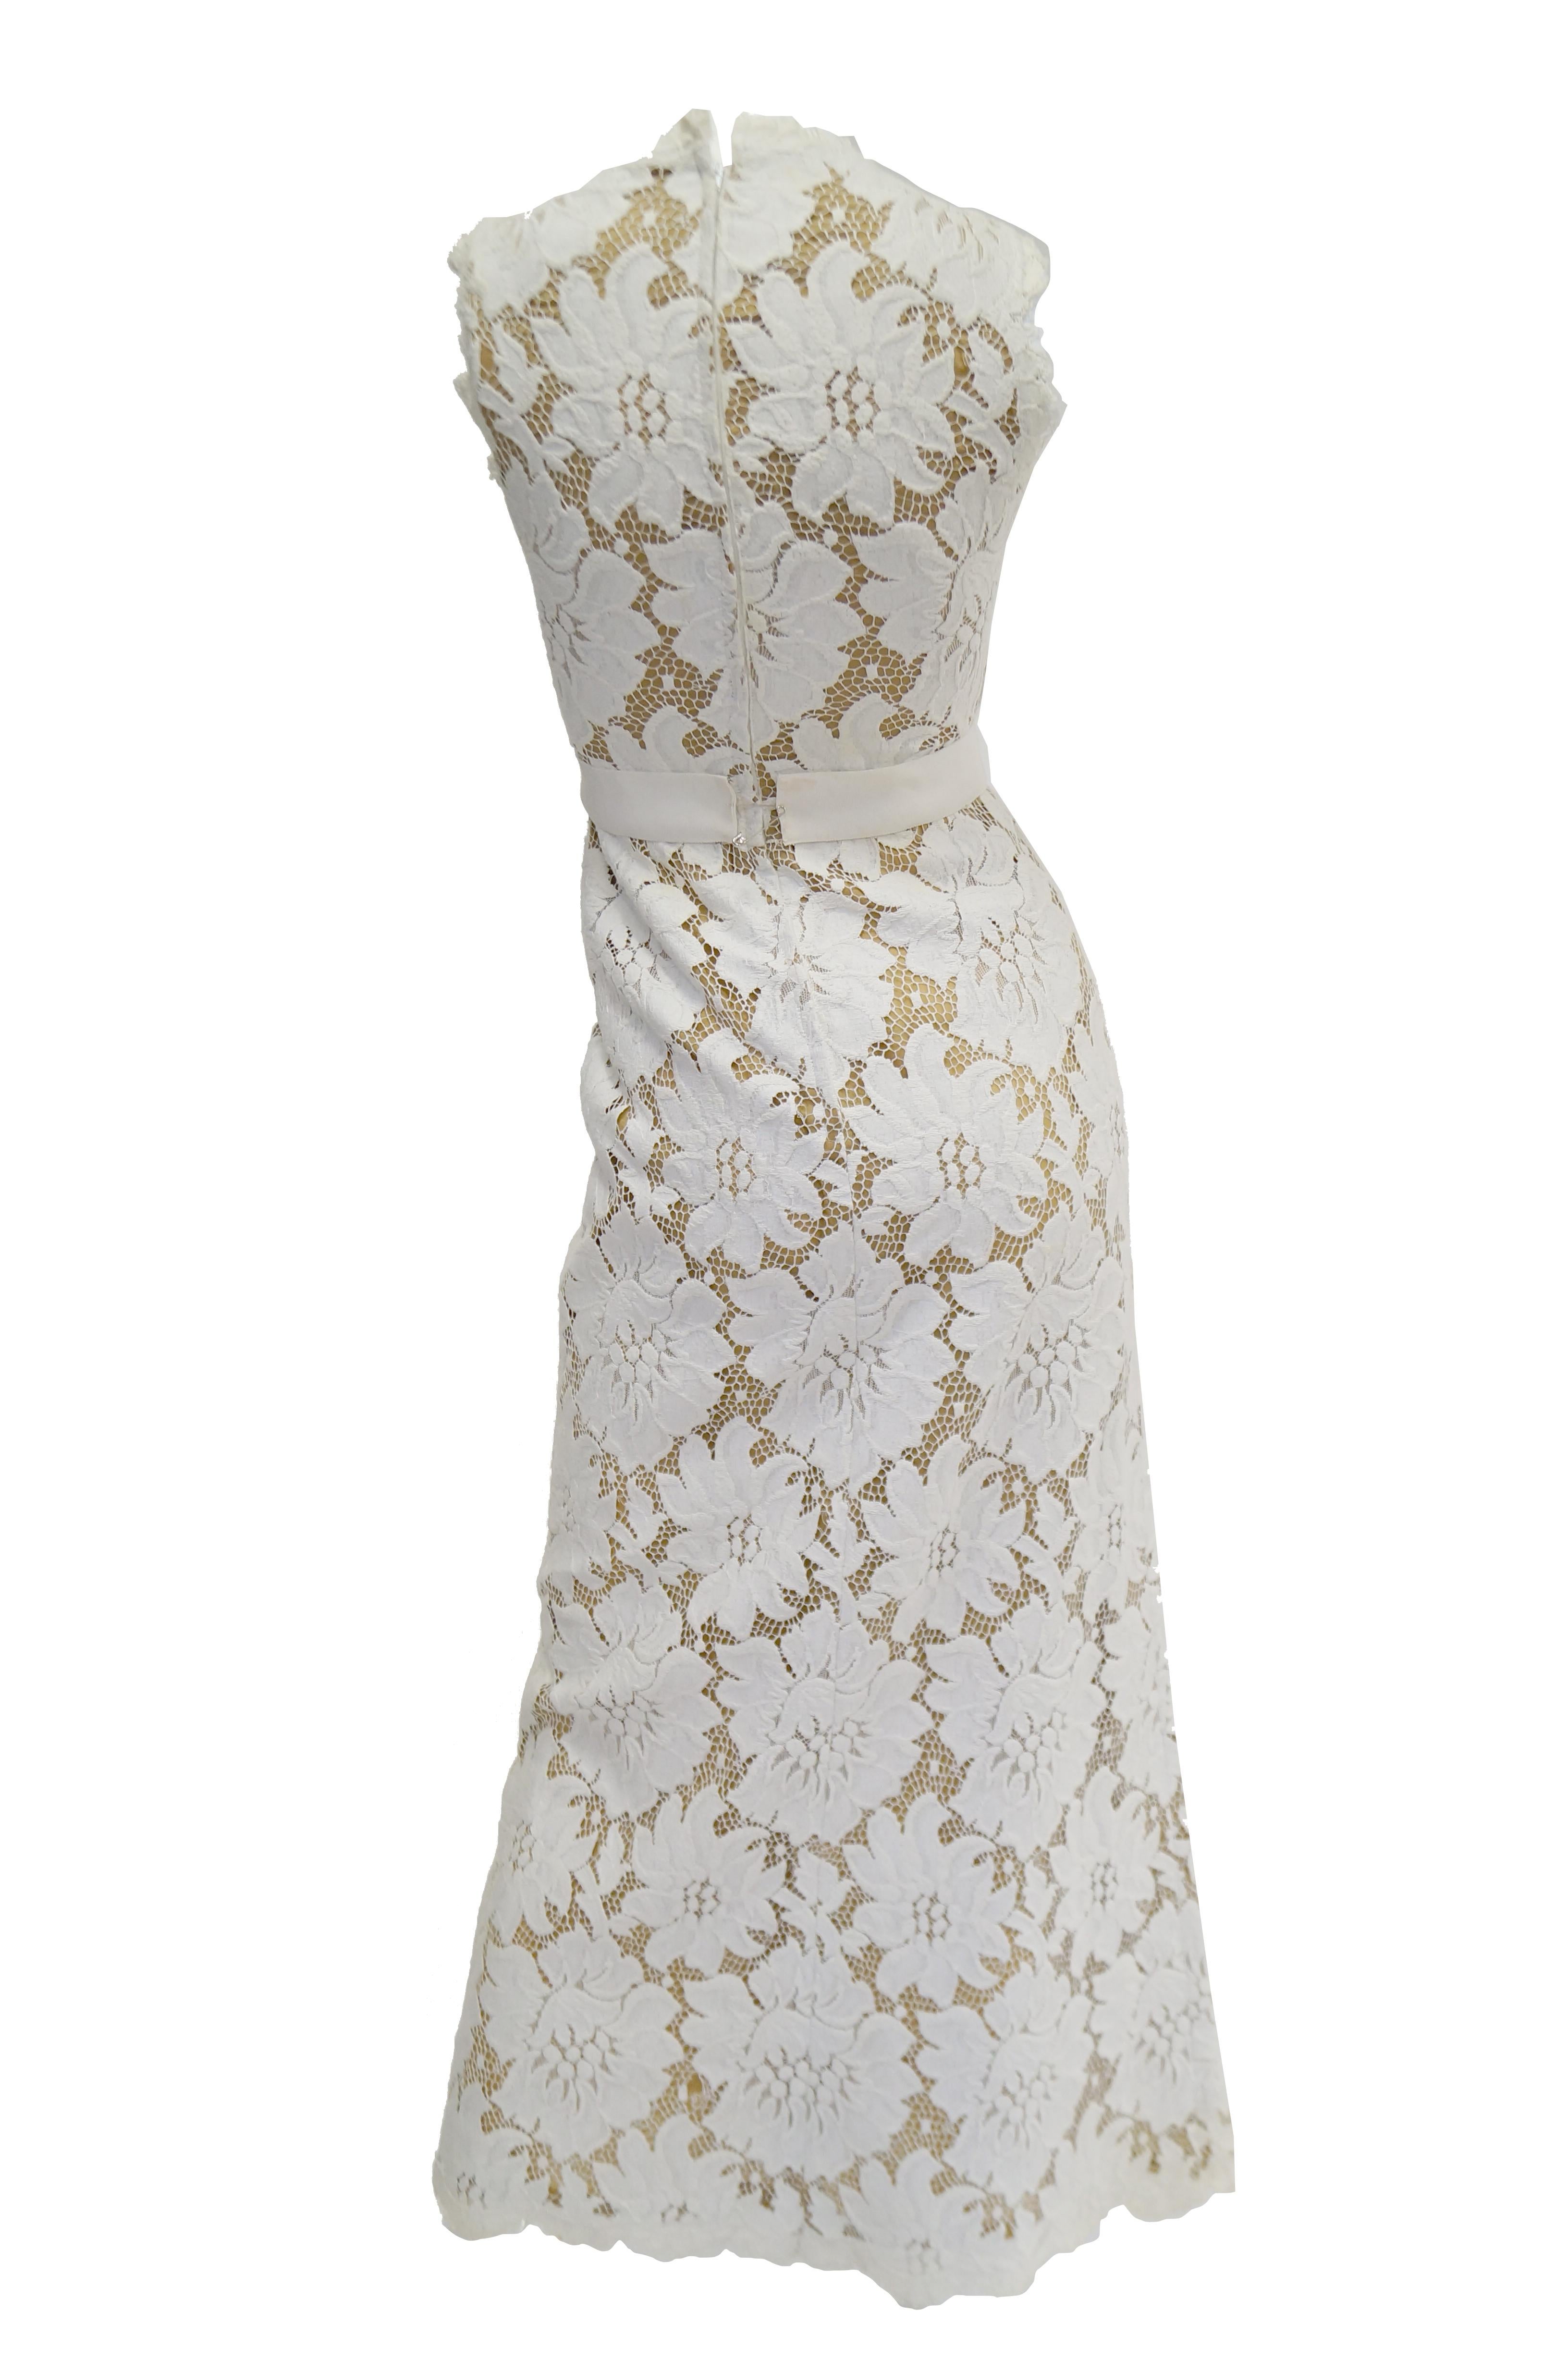 Women's 1970s White Large Scale Floral Lace Dress 